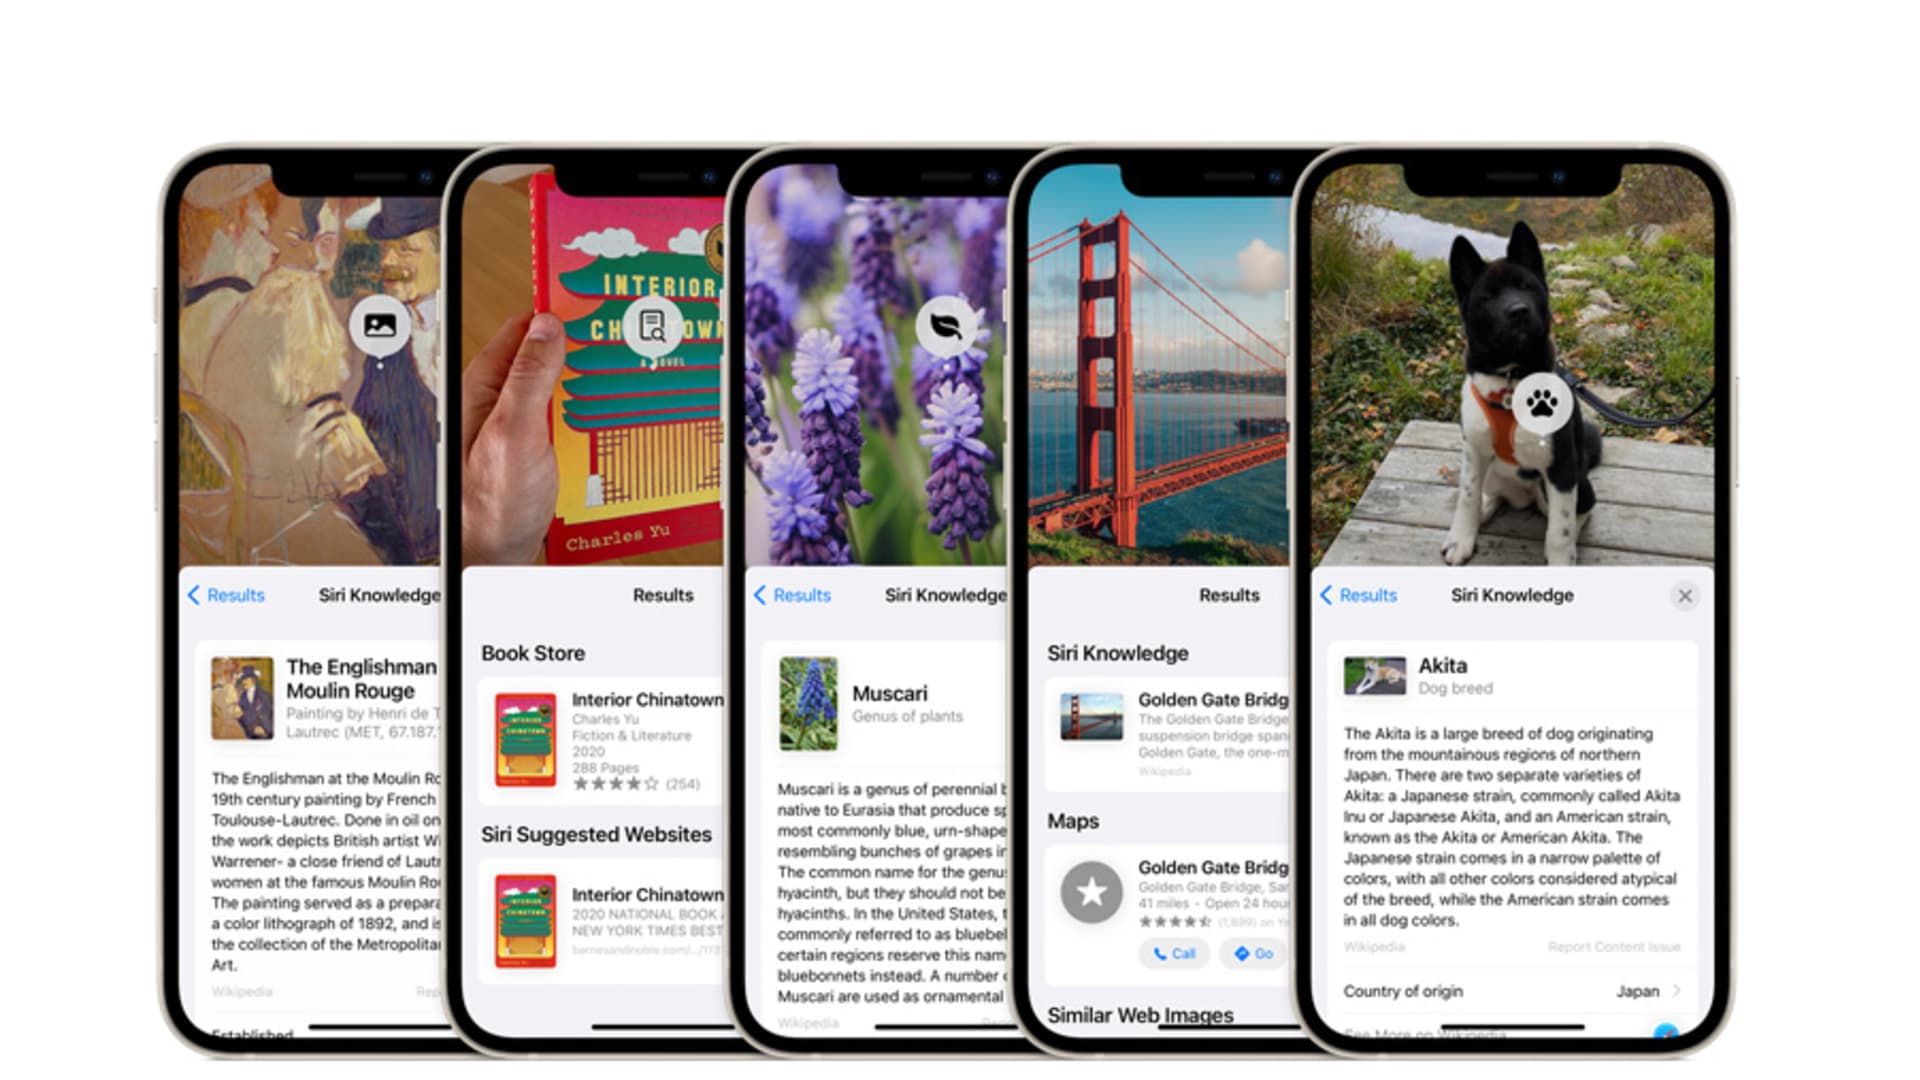 Apple iOS 15 will let you search things in your photos.